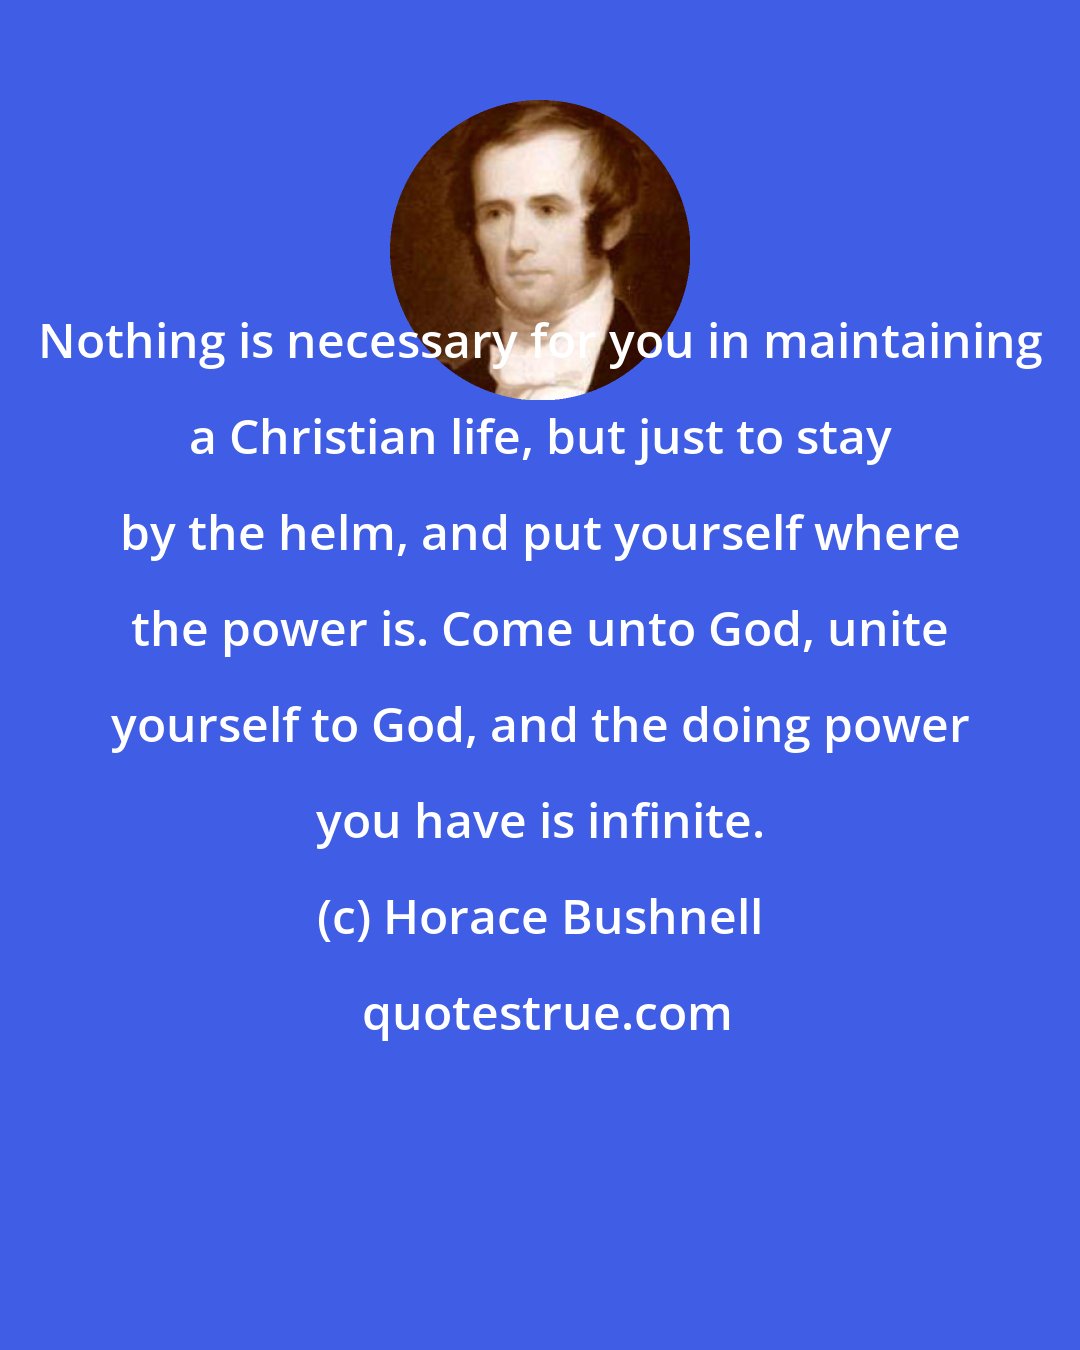 Horace Bushnell: Nothing is necessary for you in maintaining a Christian life, but just to stay by the helm, and put yourself where the power is. Come unto God, unite yourself to God, and the doing power you have is infinite.